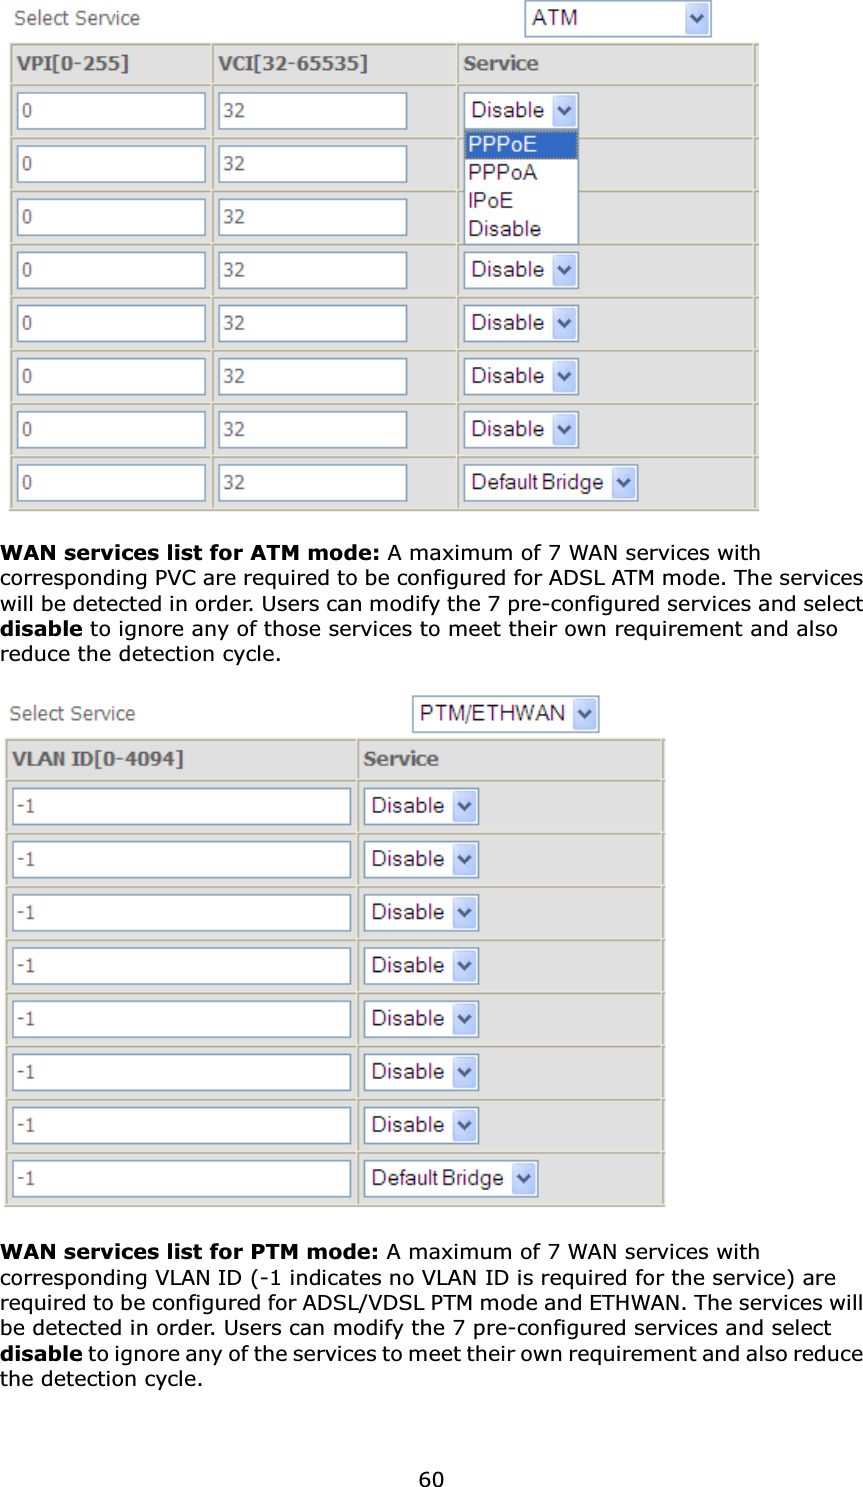 60WAN services list for ATM mode: A maximum of 7 WAN services with corresponding PVC are required to be configured for ADSL ATM mode. The services will be detected in order. Users can modify the 7 pre-configured services and select disable to ignore any of those services to meet their own requirement and also reduce the detection cycle.WAN services list for PTM mode: A maximum of 7 WAN services with corresponding VLAN ID (-1 indicates no VLAN ID is required for the service) are required to be configured for ADSL/VDSL PTM mode and ETHWAN. The services will be detected in order. Users can modify the 7 pre-configured services and select disable to ignore any of the services to meet their own requirement and also reduce the detection cycle.